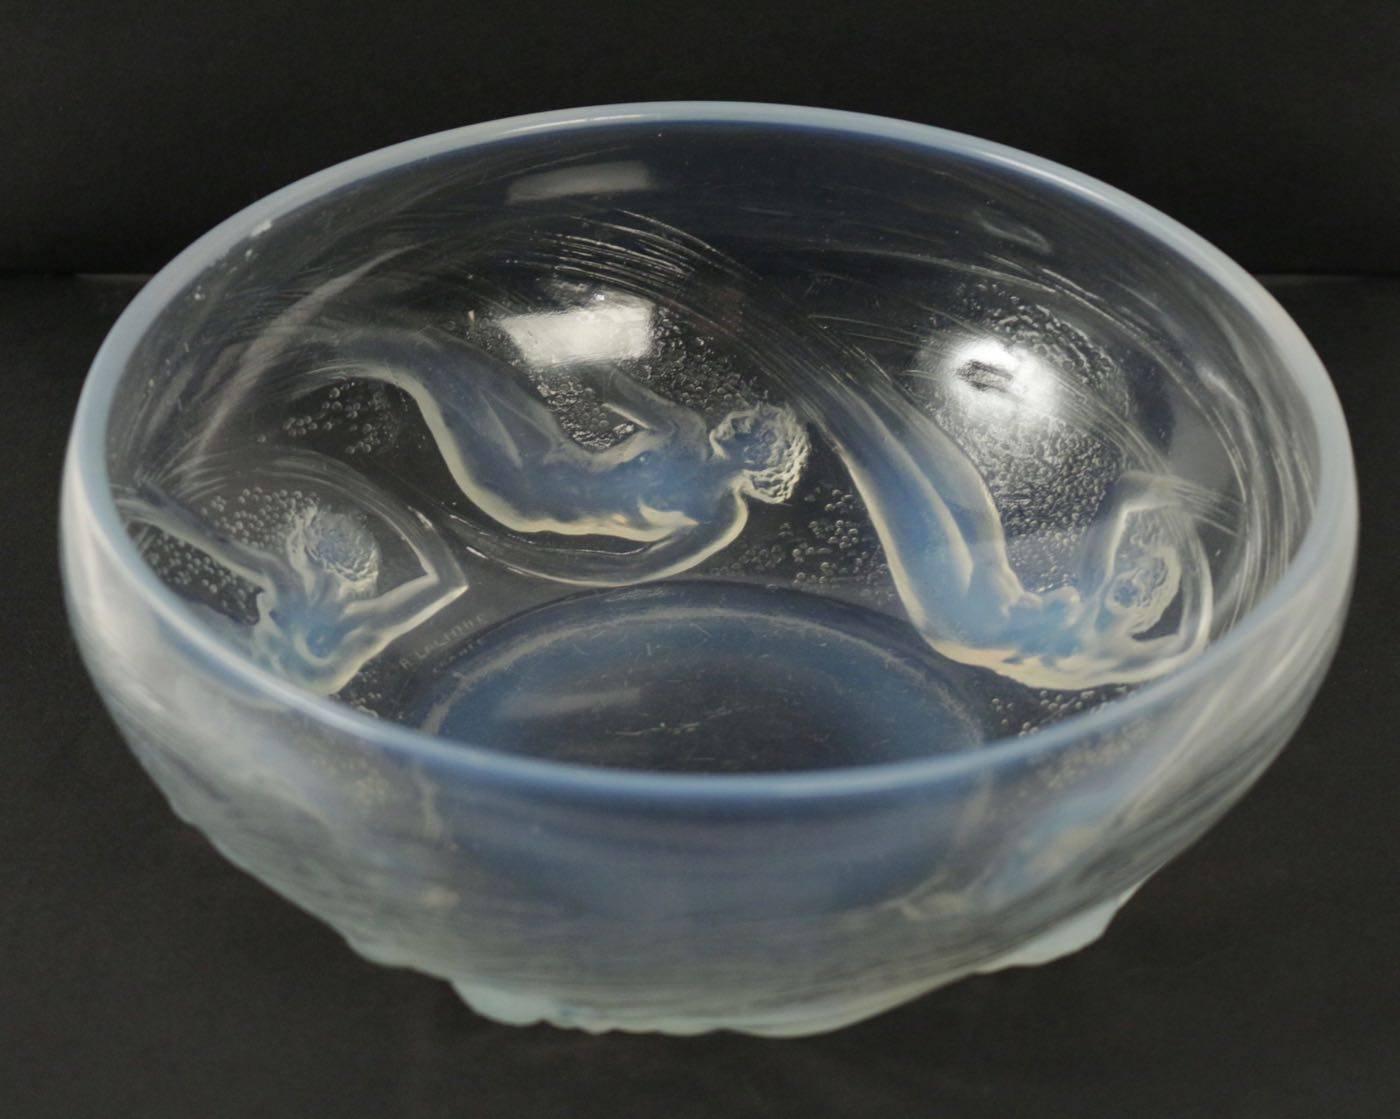 Wide opalescent and frosted round glass with a design of six mythical nude female type figures (Ondines) in various swirling possess around the bowl
Model created in 1921
signed R Lalique engraved
Bibliographie: F. Marcilhac, , réf. N°380, p. 292.